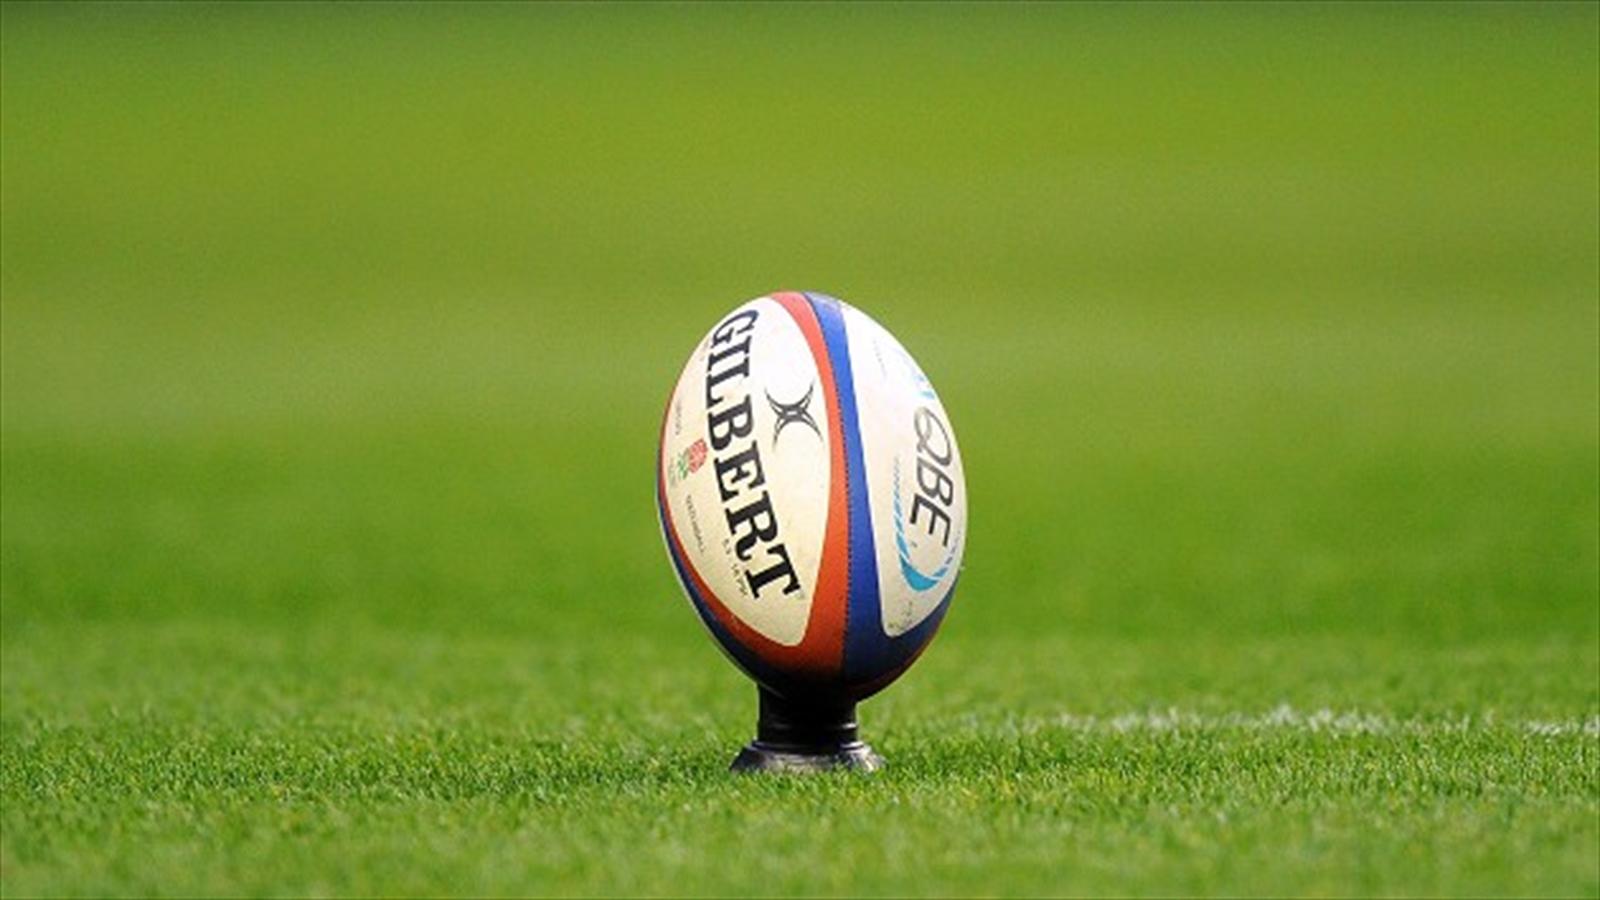 Rugby Wallpaper 14 - Rugby Ball On Ground , HD Wallpaper & Backgrounds